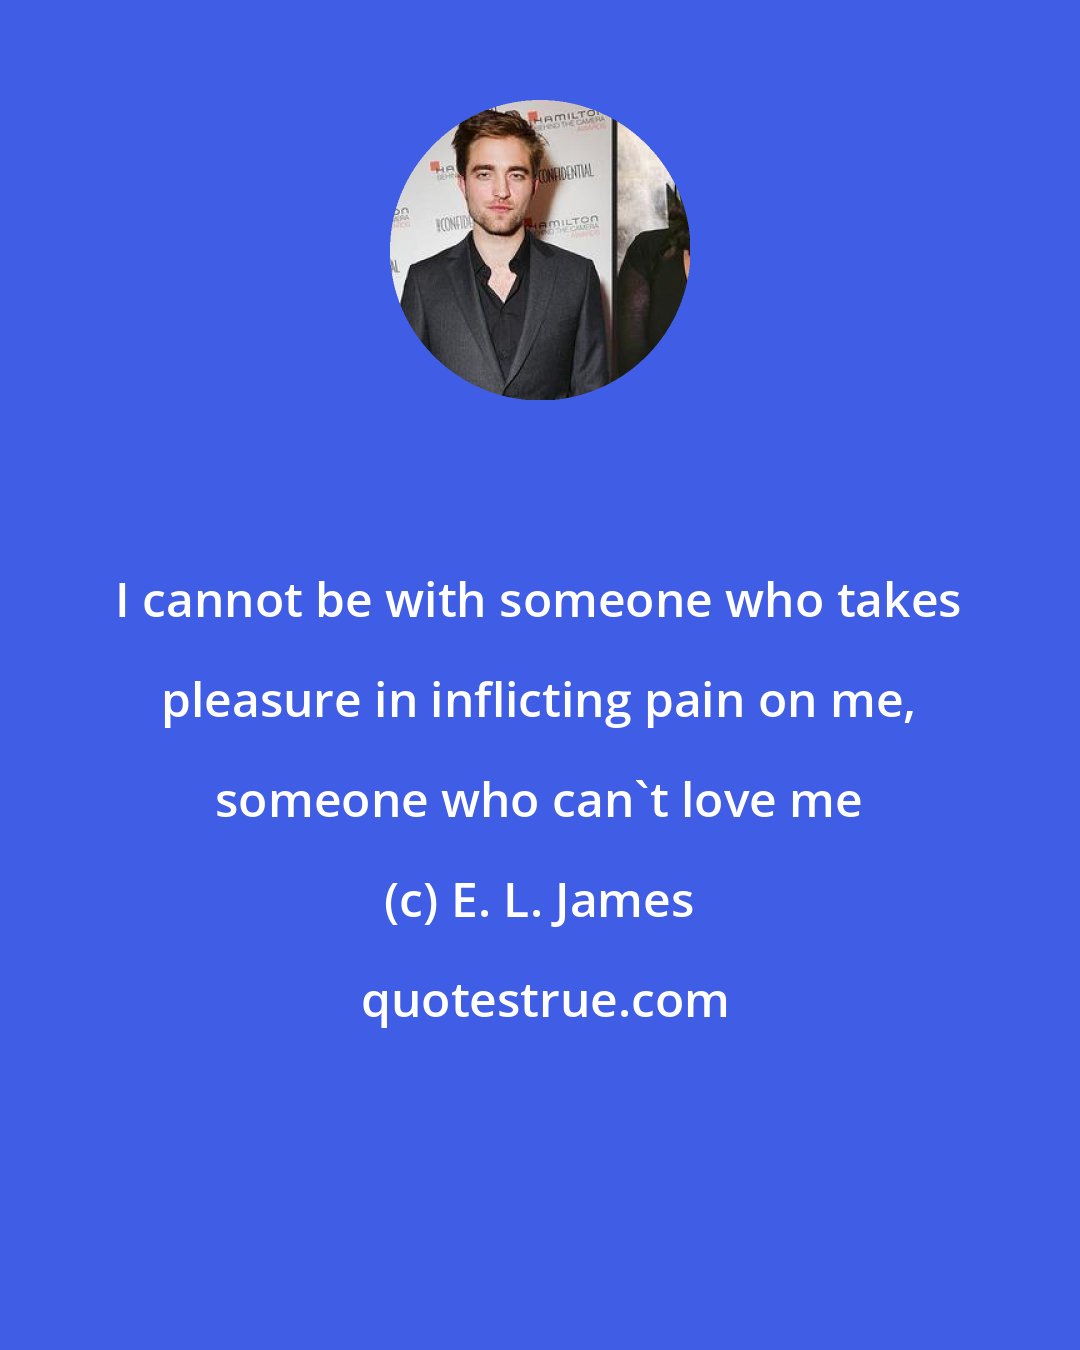 E. L. James: I cannot be with someone who takes pleasure in inflicting pain on me, someone who can't love me